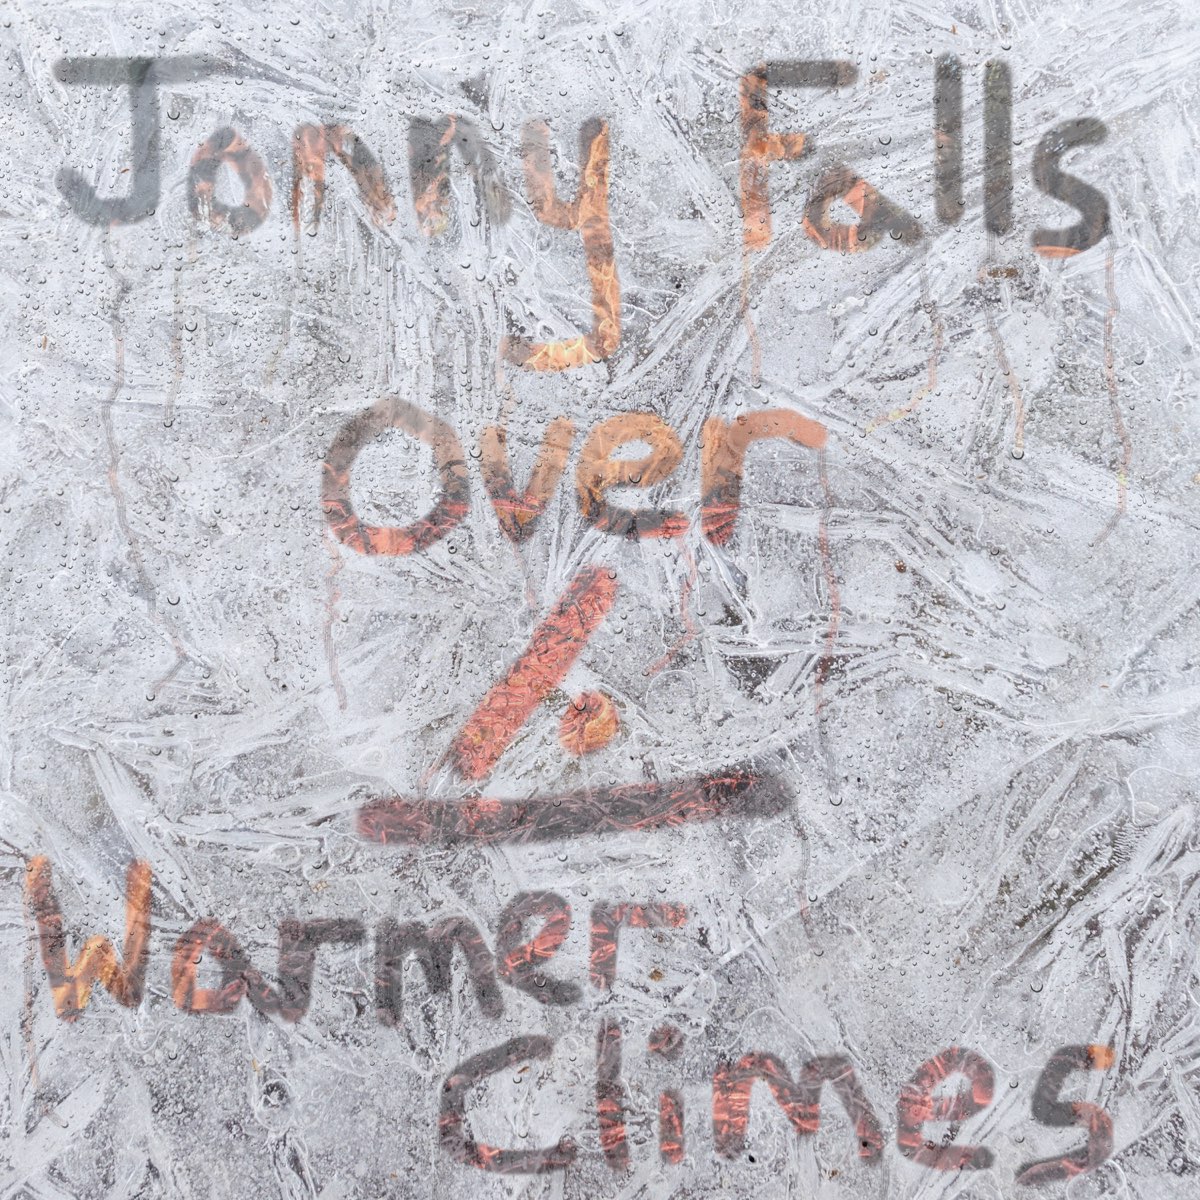 Falling over. Climes. Fall over. The Warmers - wanted - more (Ep).